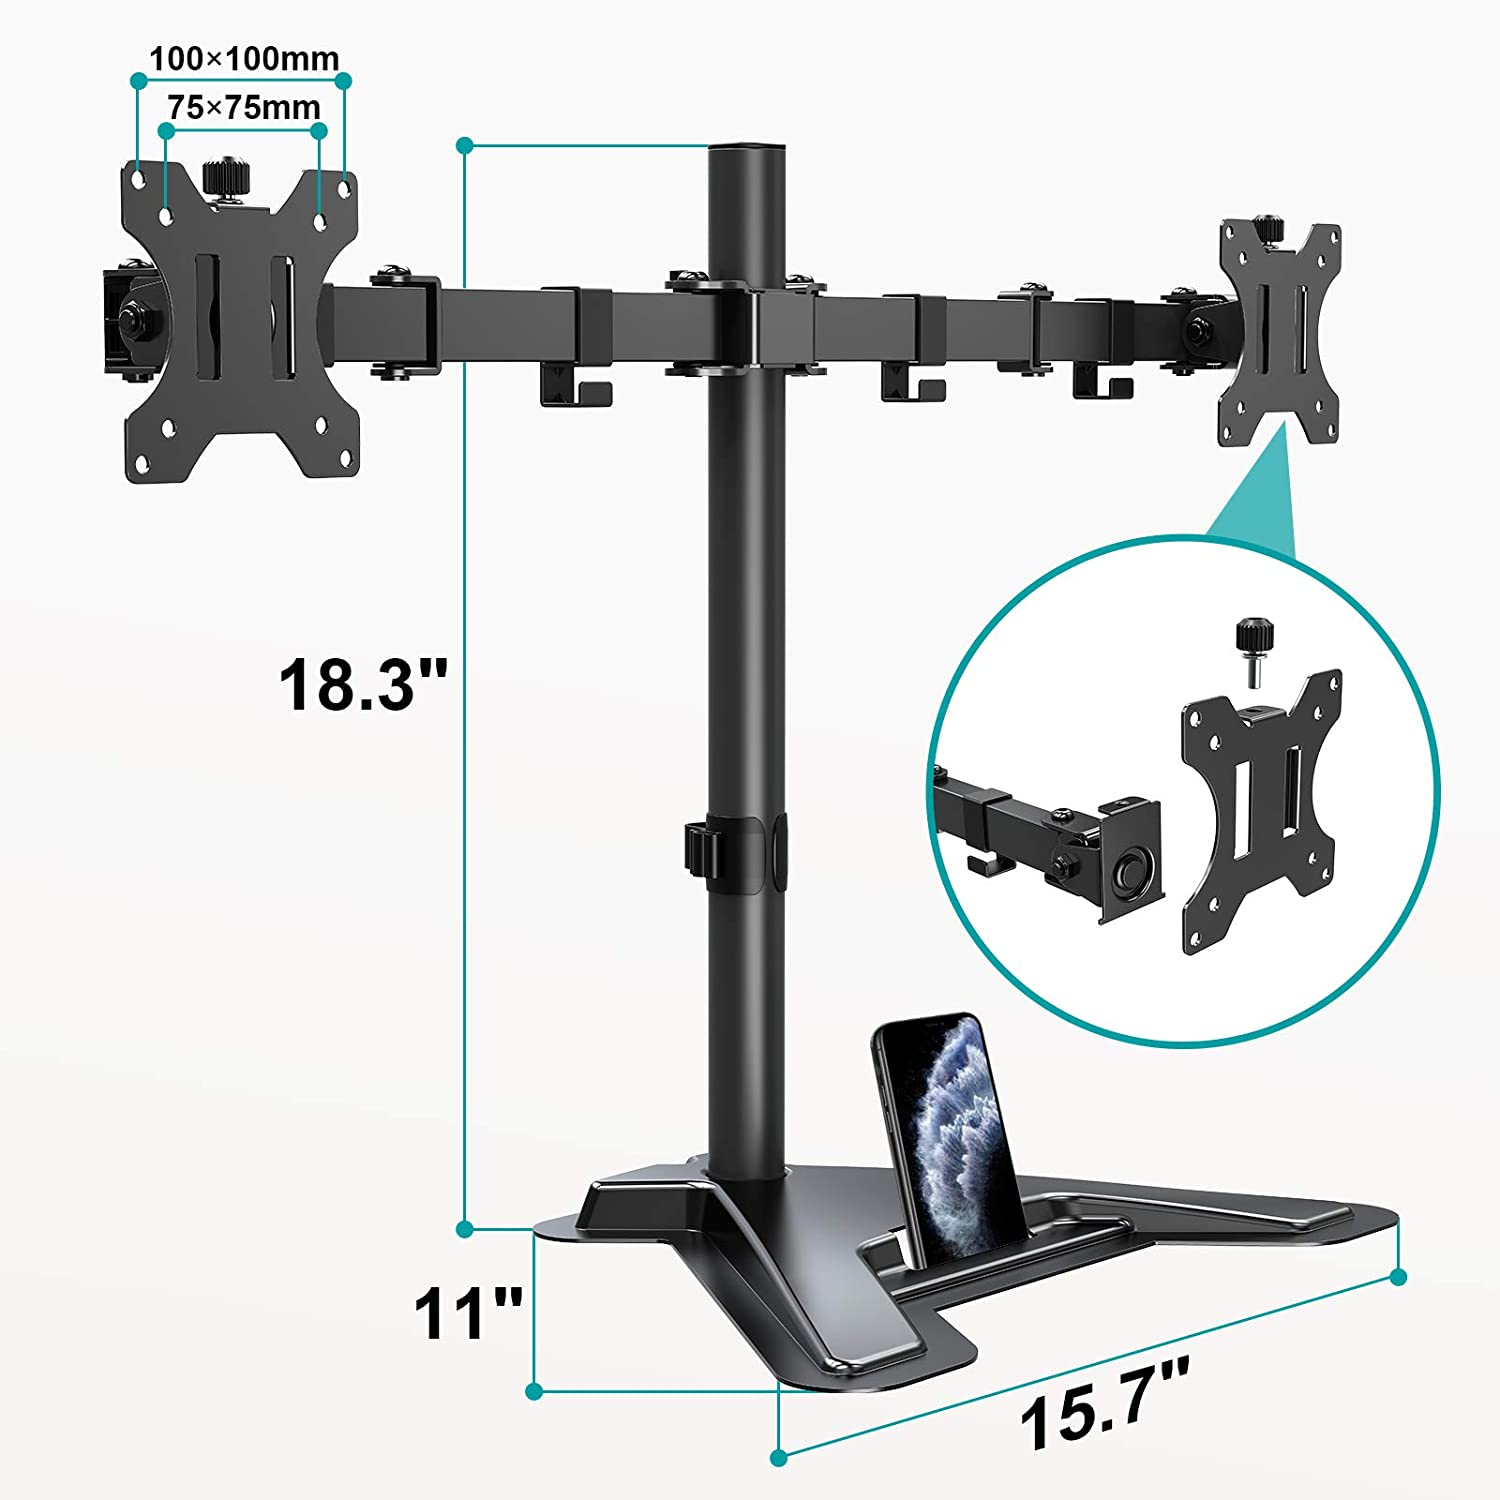 Dual Arms vesa dual monitor desk stand for 75×75 and 100×100 hole pattern